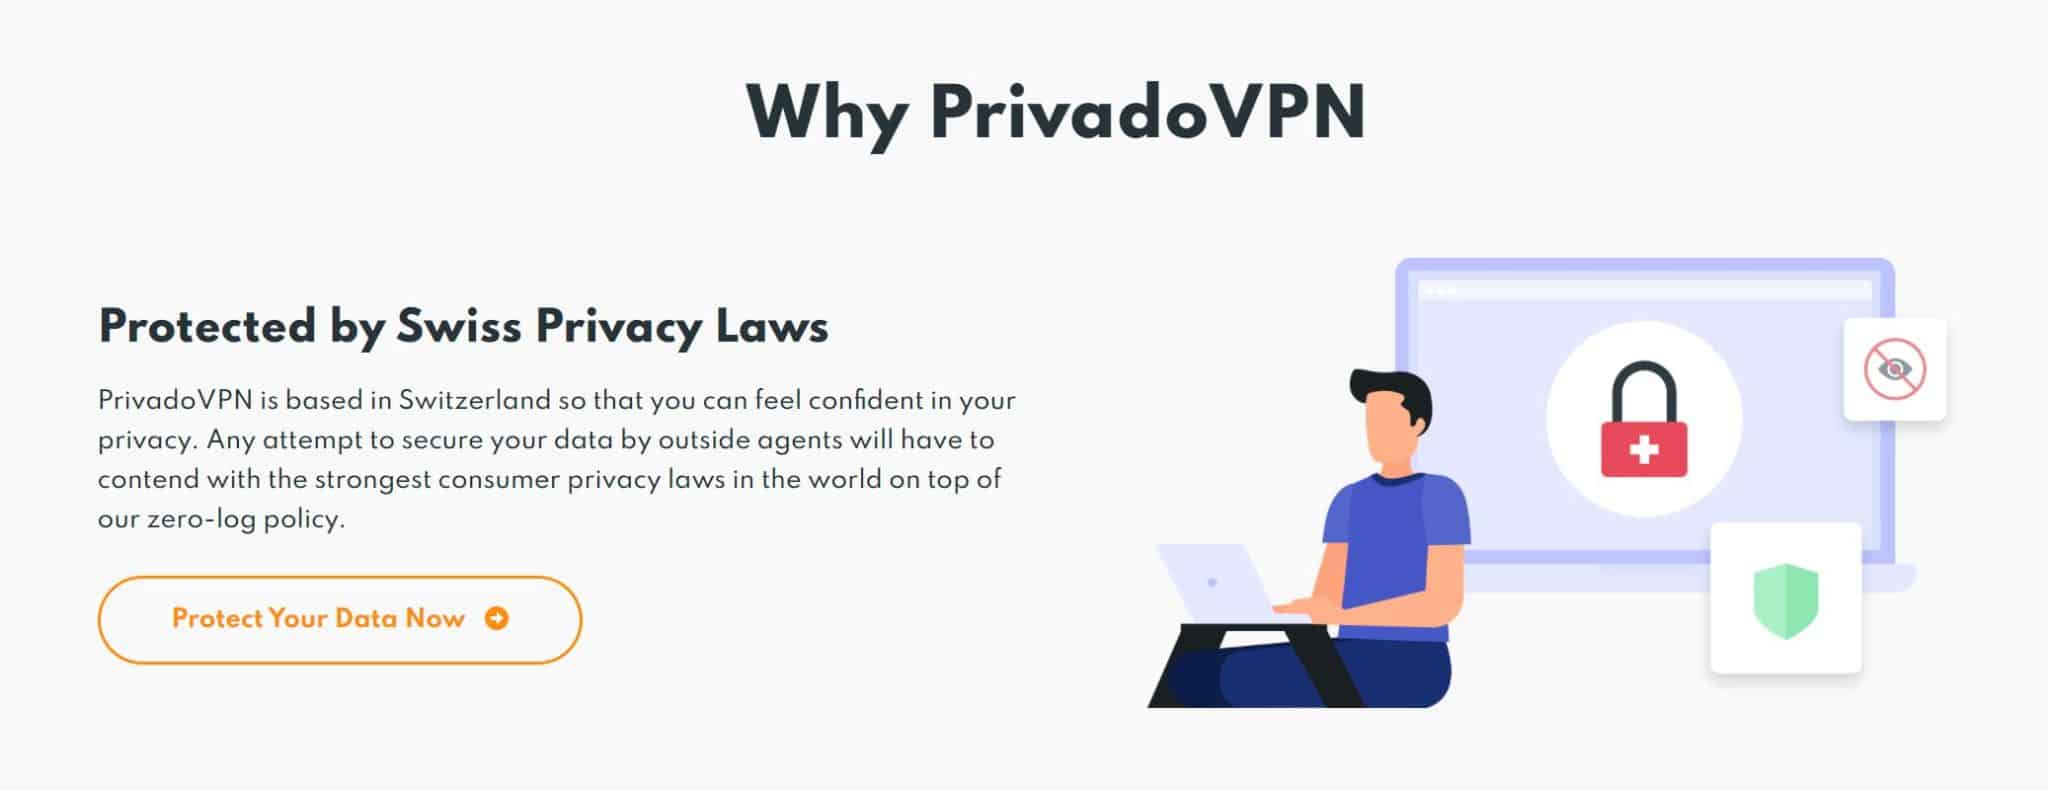 PrivadoVPN download the last version for ipod